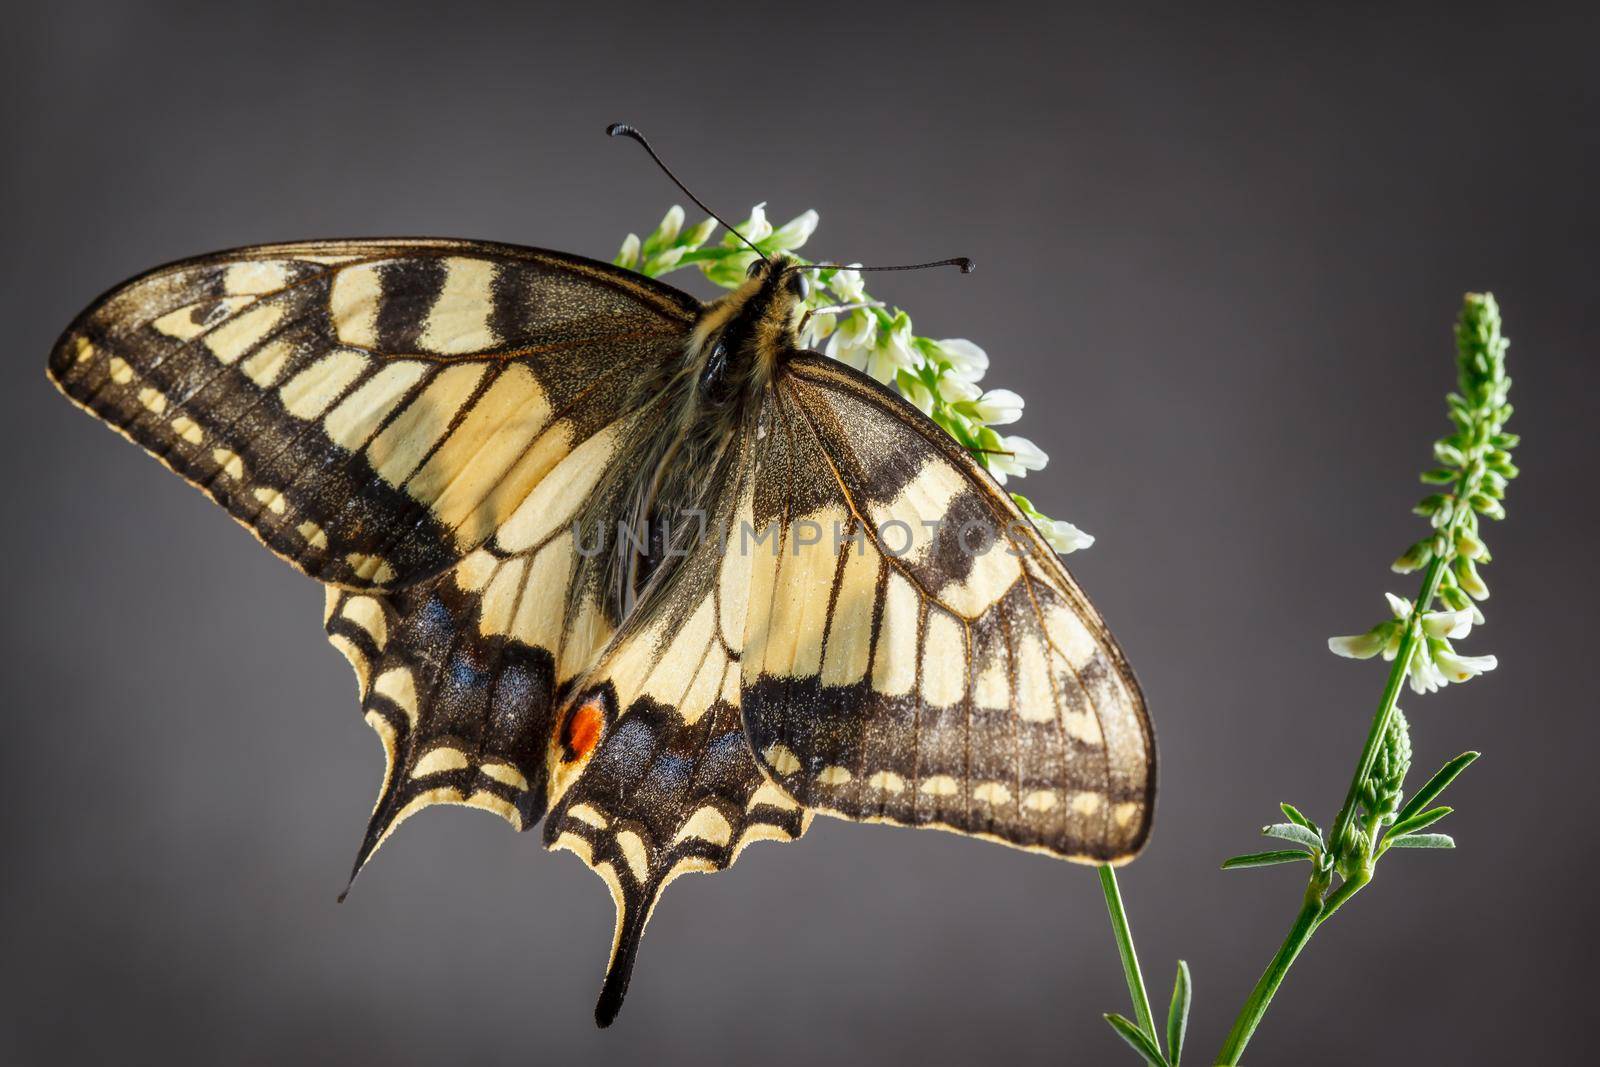 Old World swallowtail butterfly sitting on the plant